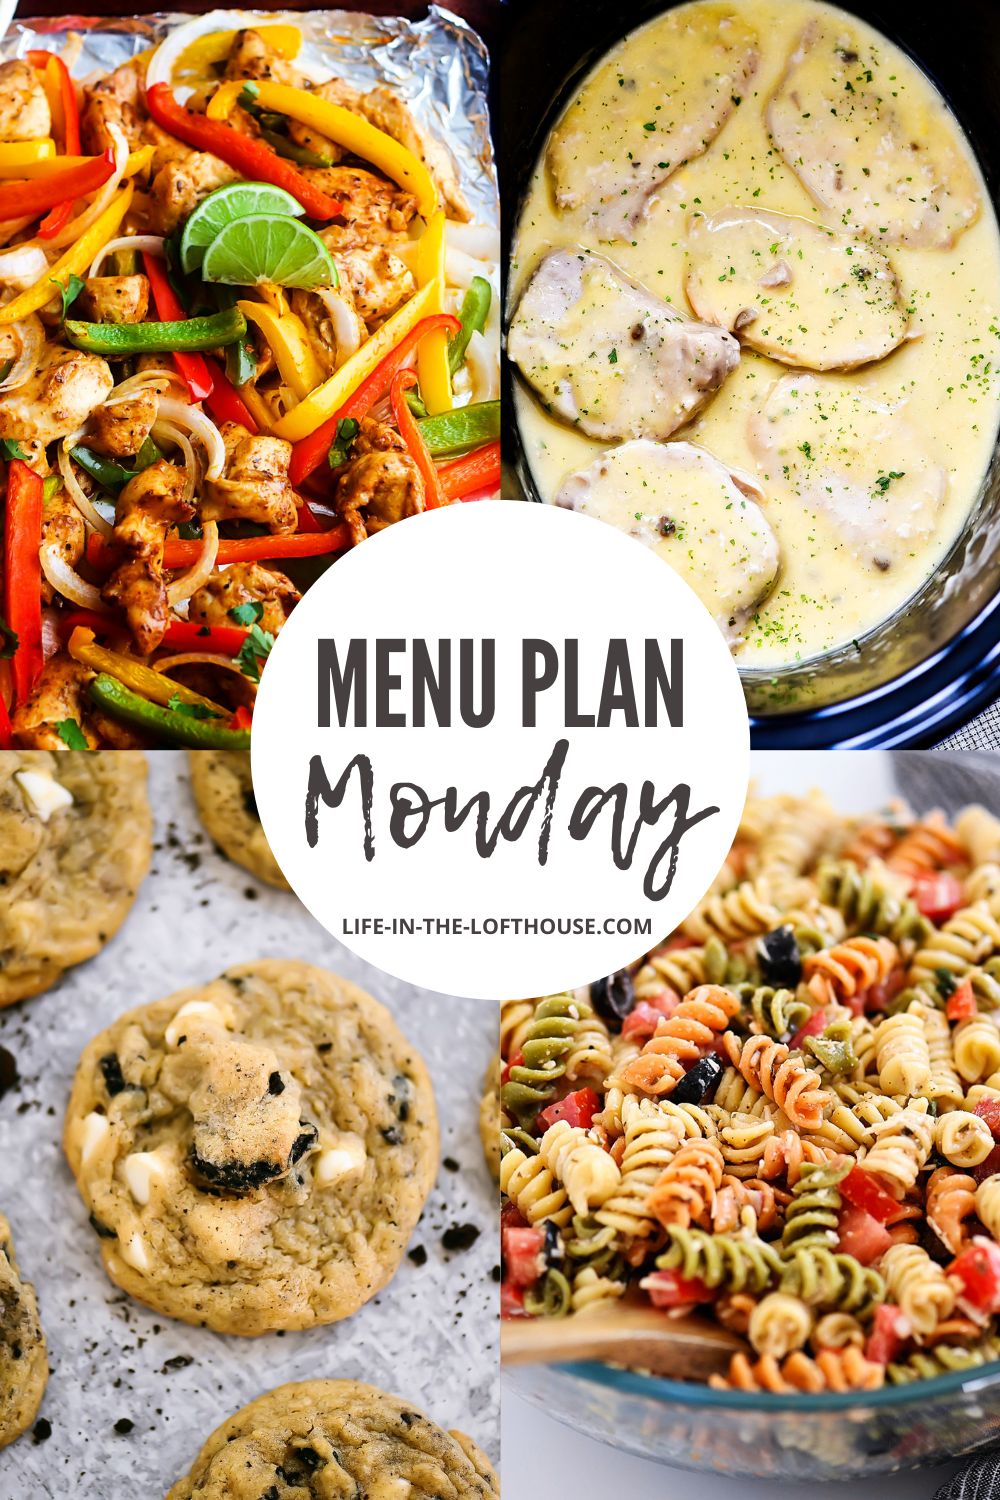 Menu Plan Monday is a list of six dinners and one dessert. Life-in-the-Lofthouse.com